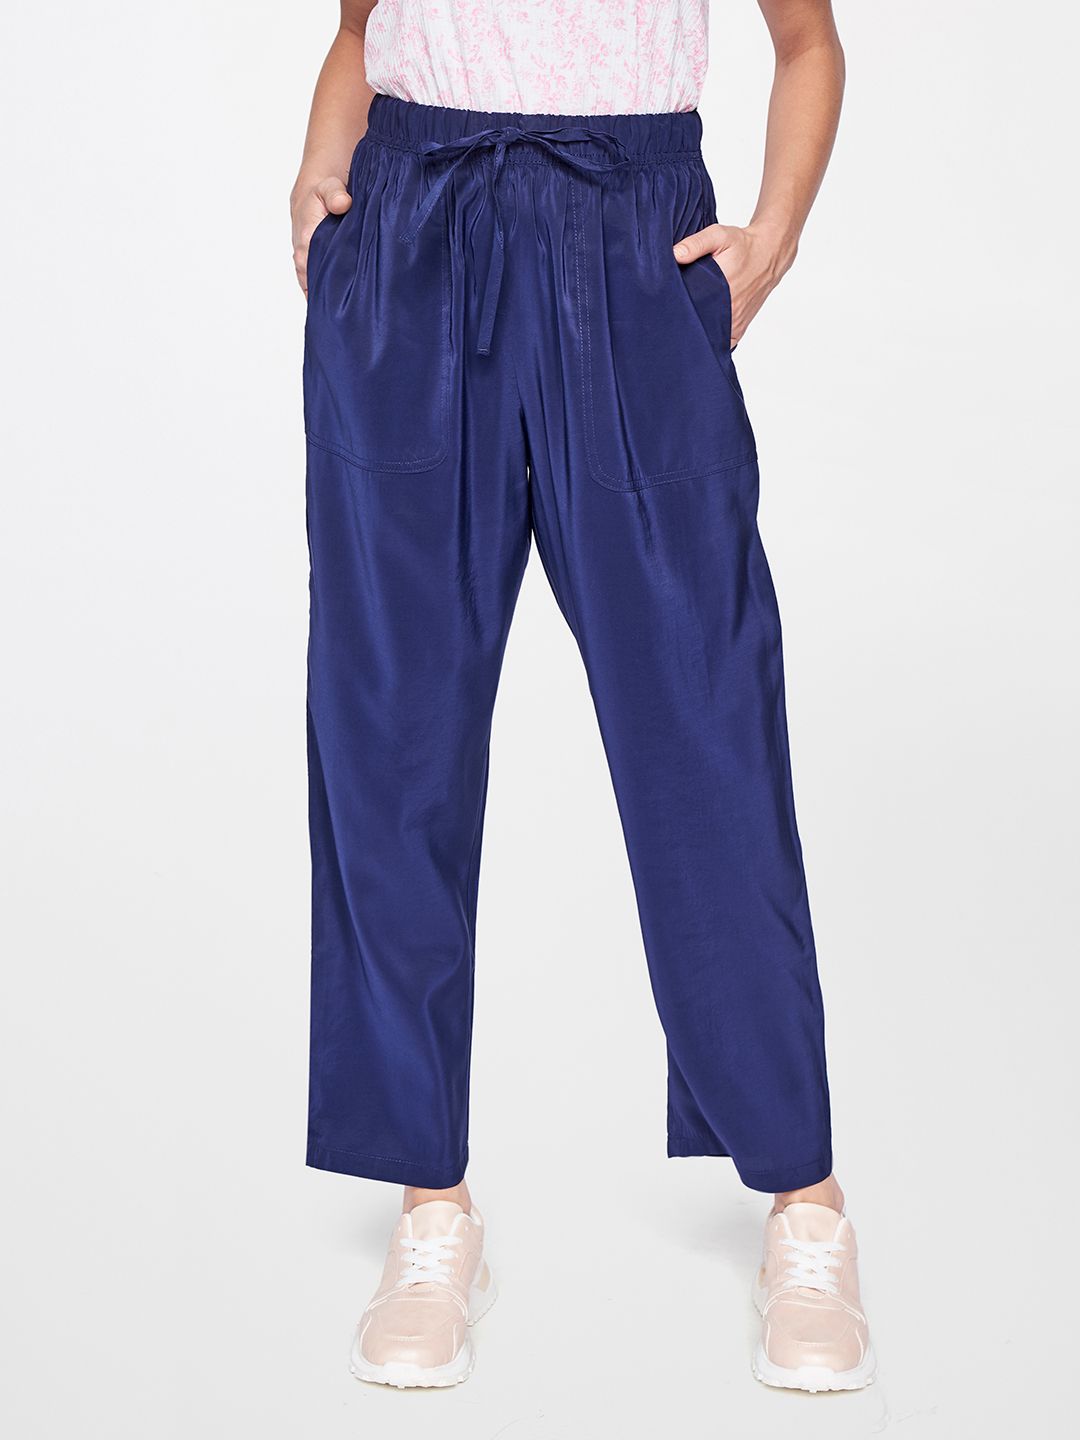 AND Women Navy Blue Straight Fit Pleated Trousers Price in India